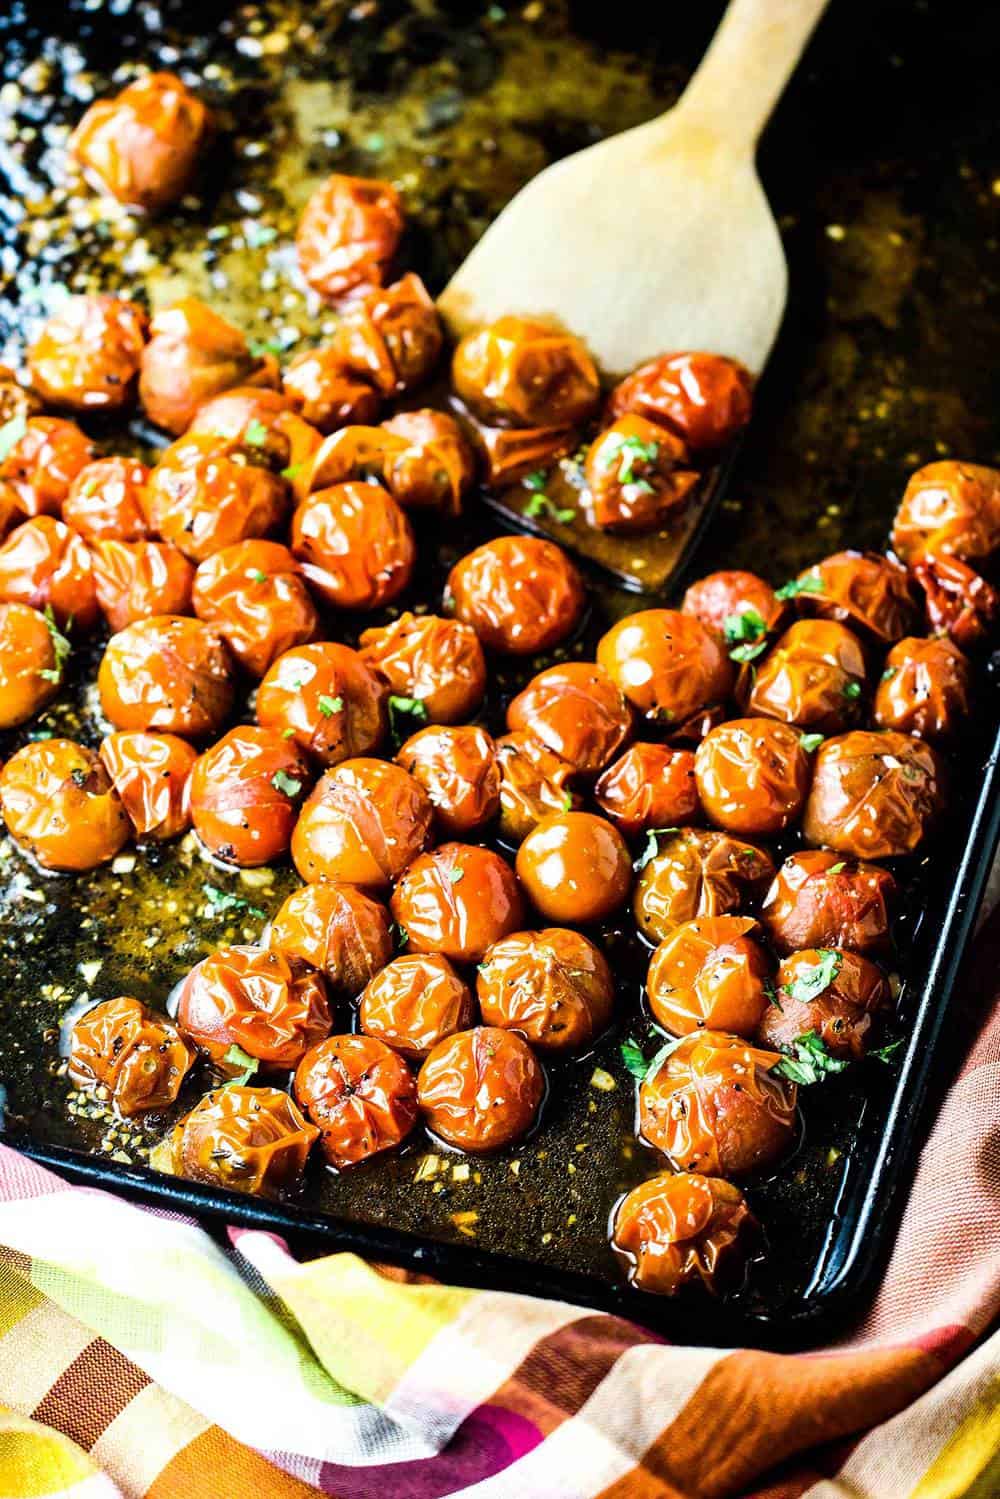 Roasted cherry tomatoes on a baking dish with a wooden spoon